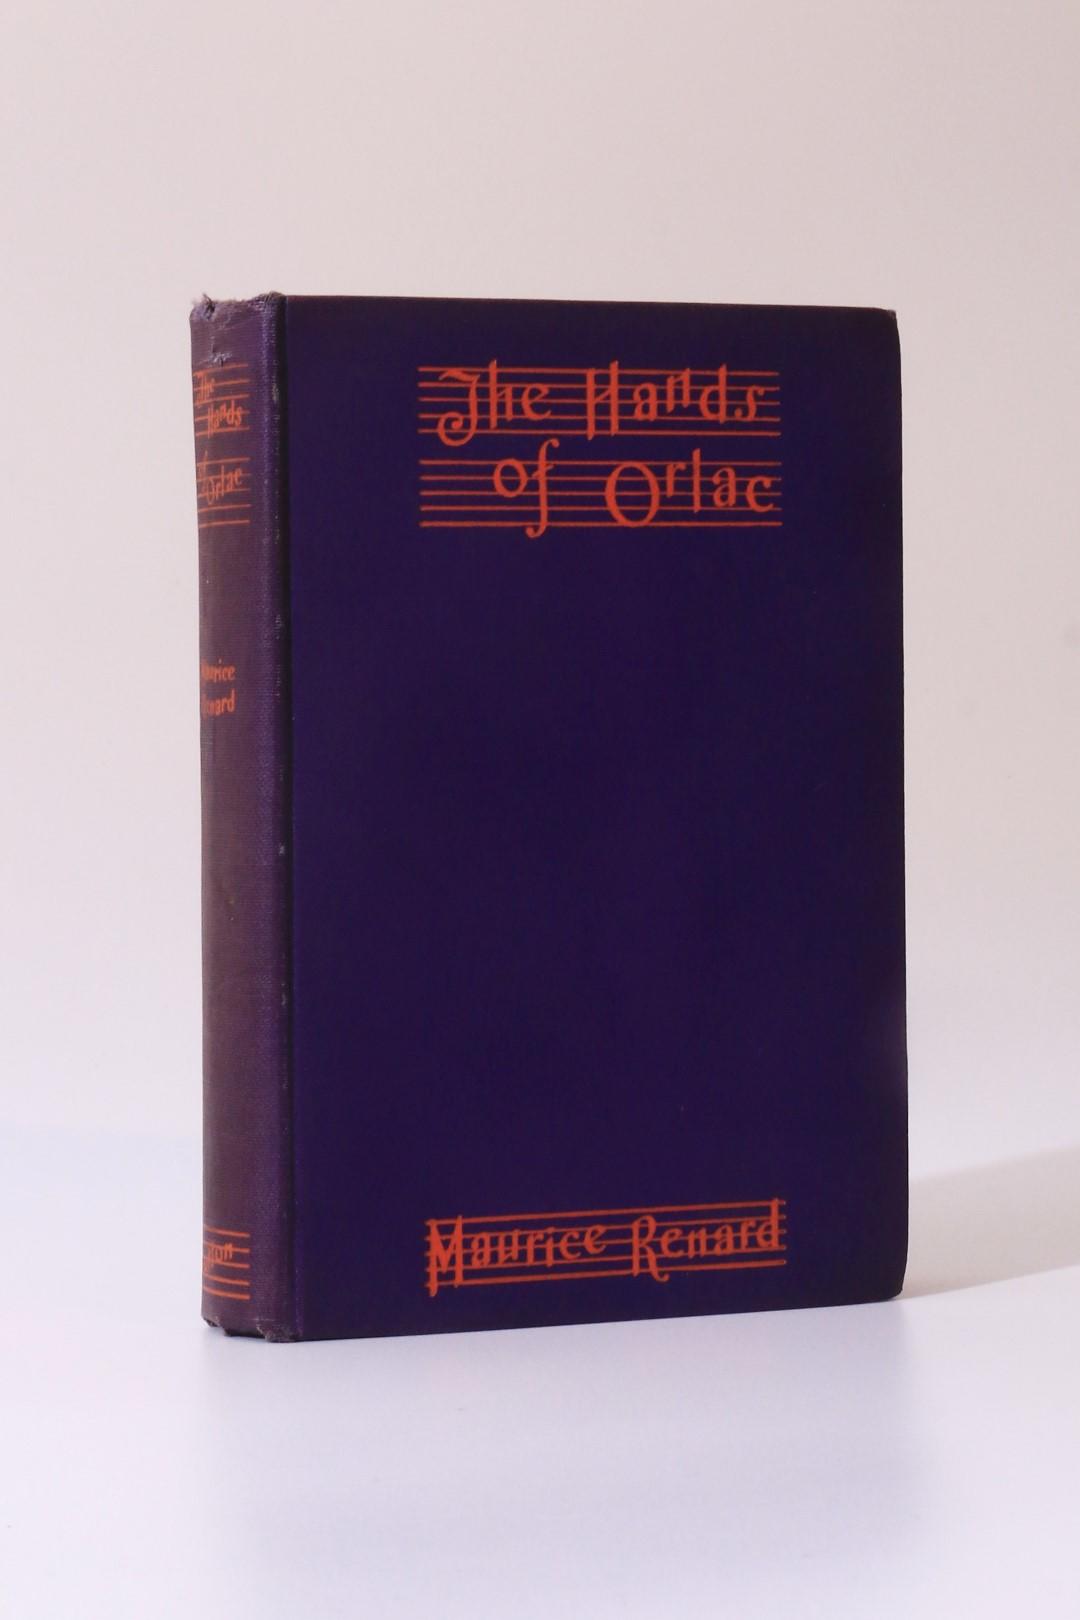 Maurice Renard - The Hands of Orlac - Dutton, nd [1929], First Edition.